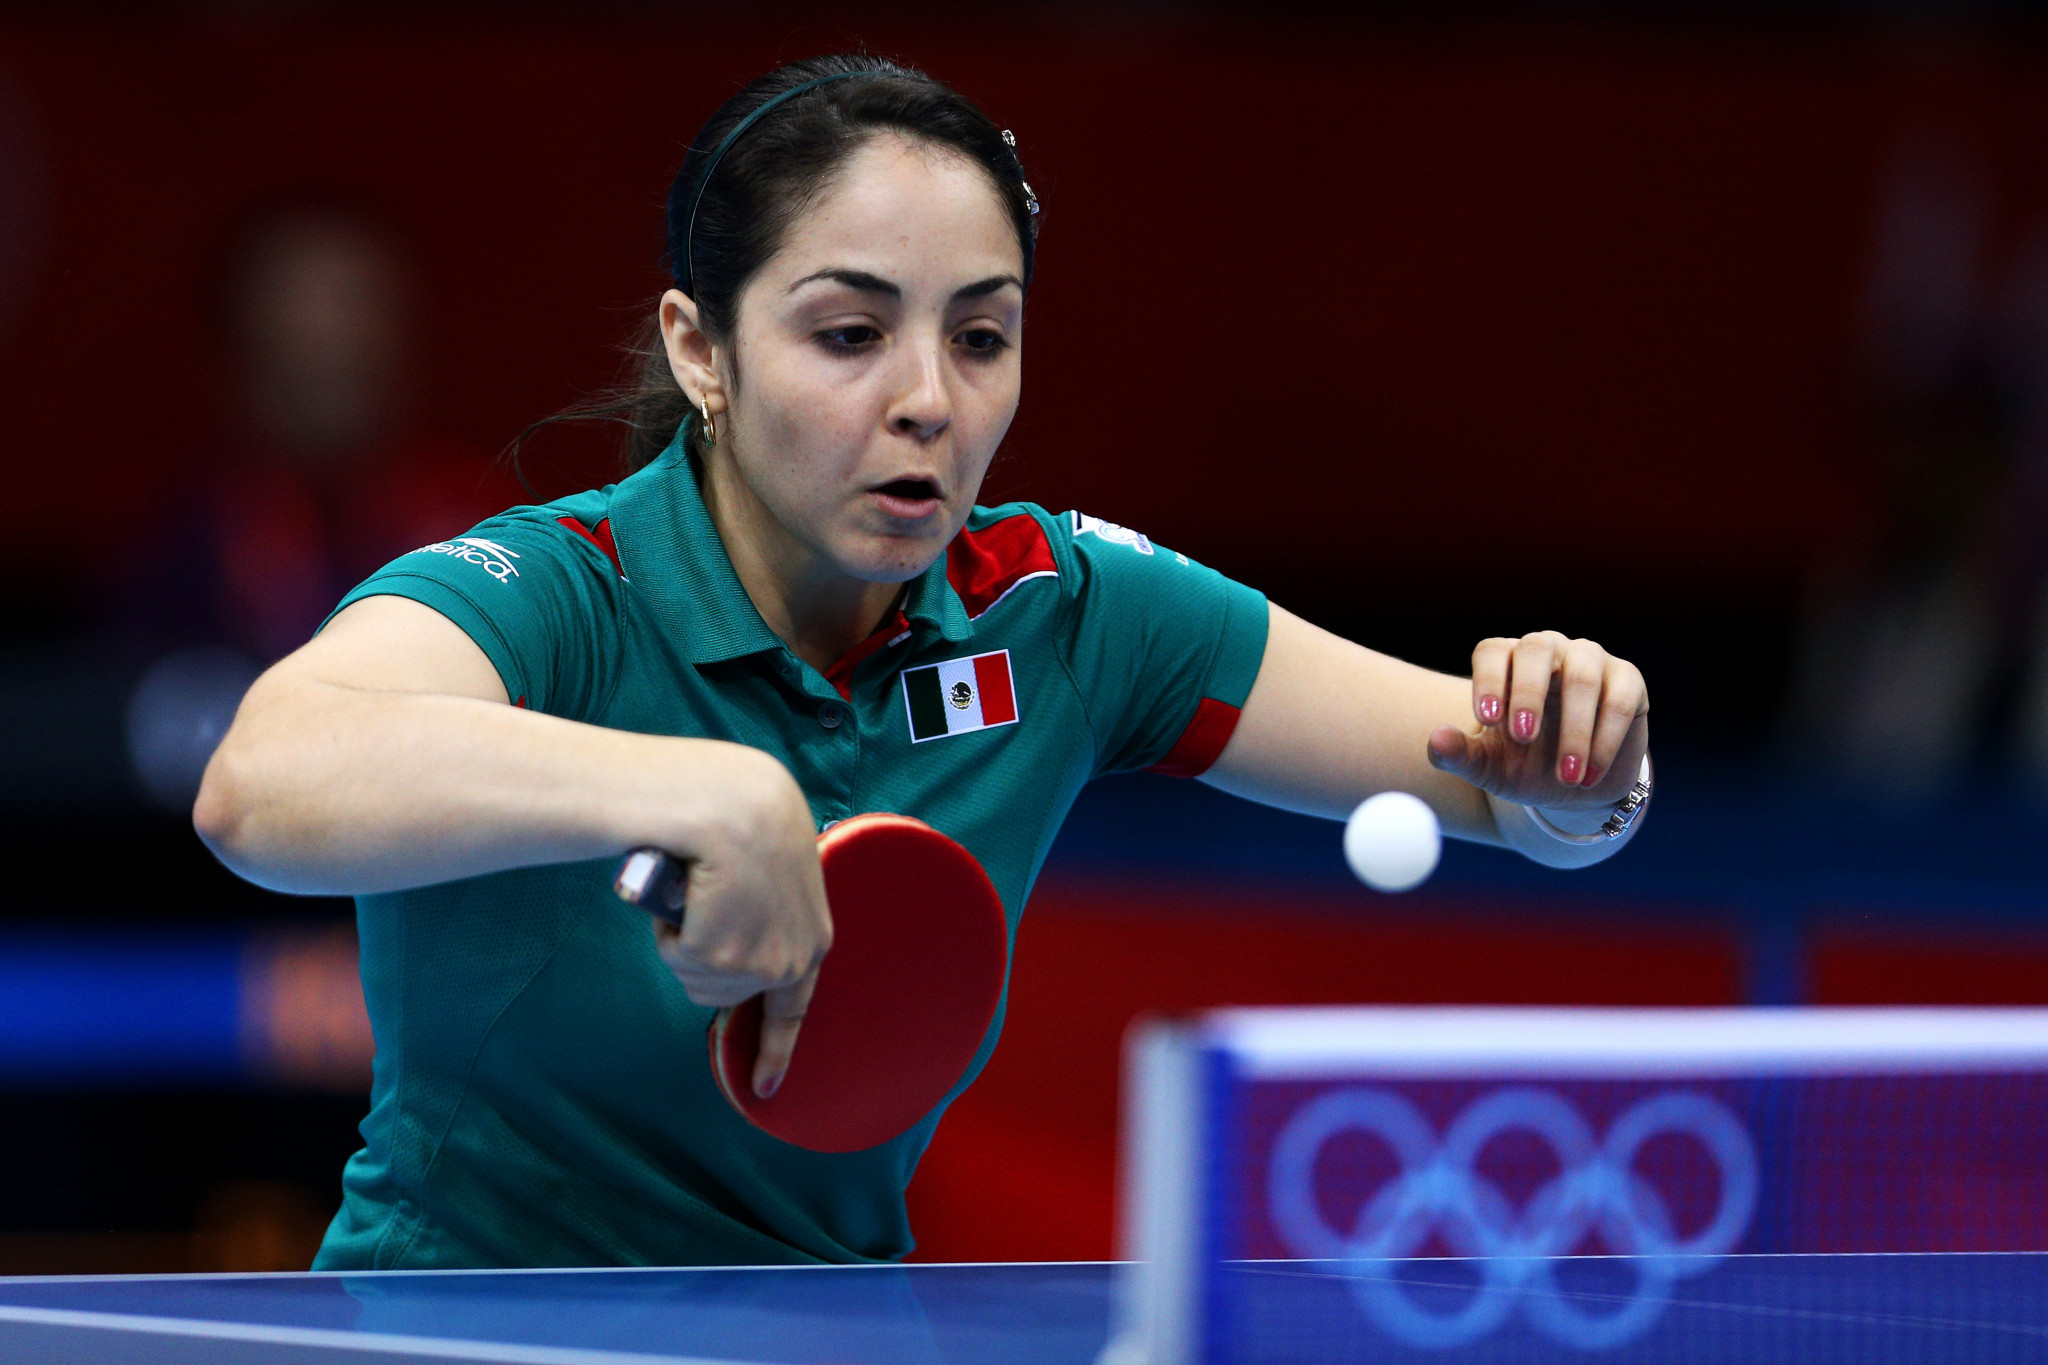 Mexico’s Yadira Silva advanced in the women's singles competition ©Getty Images